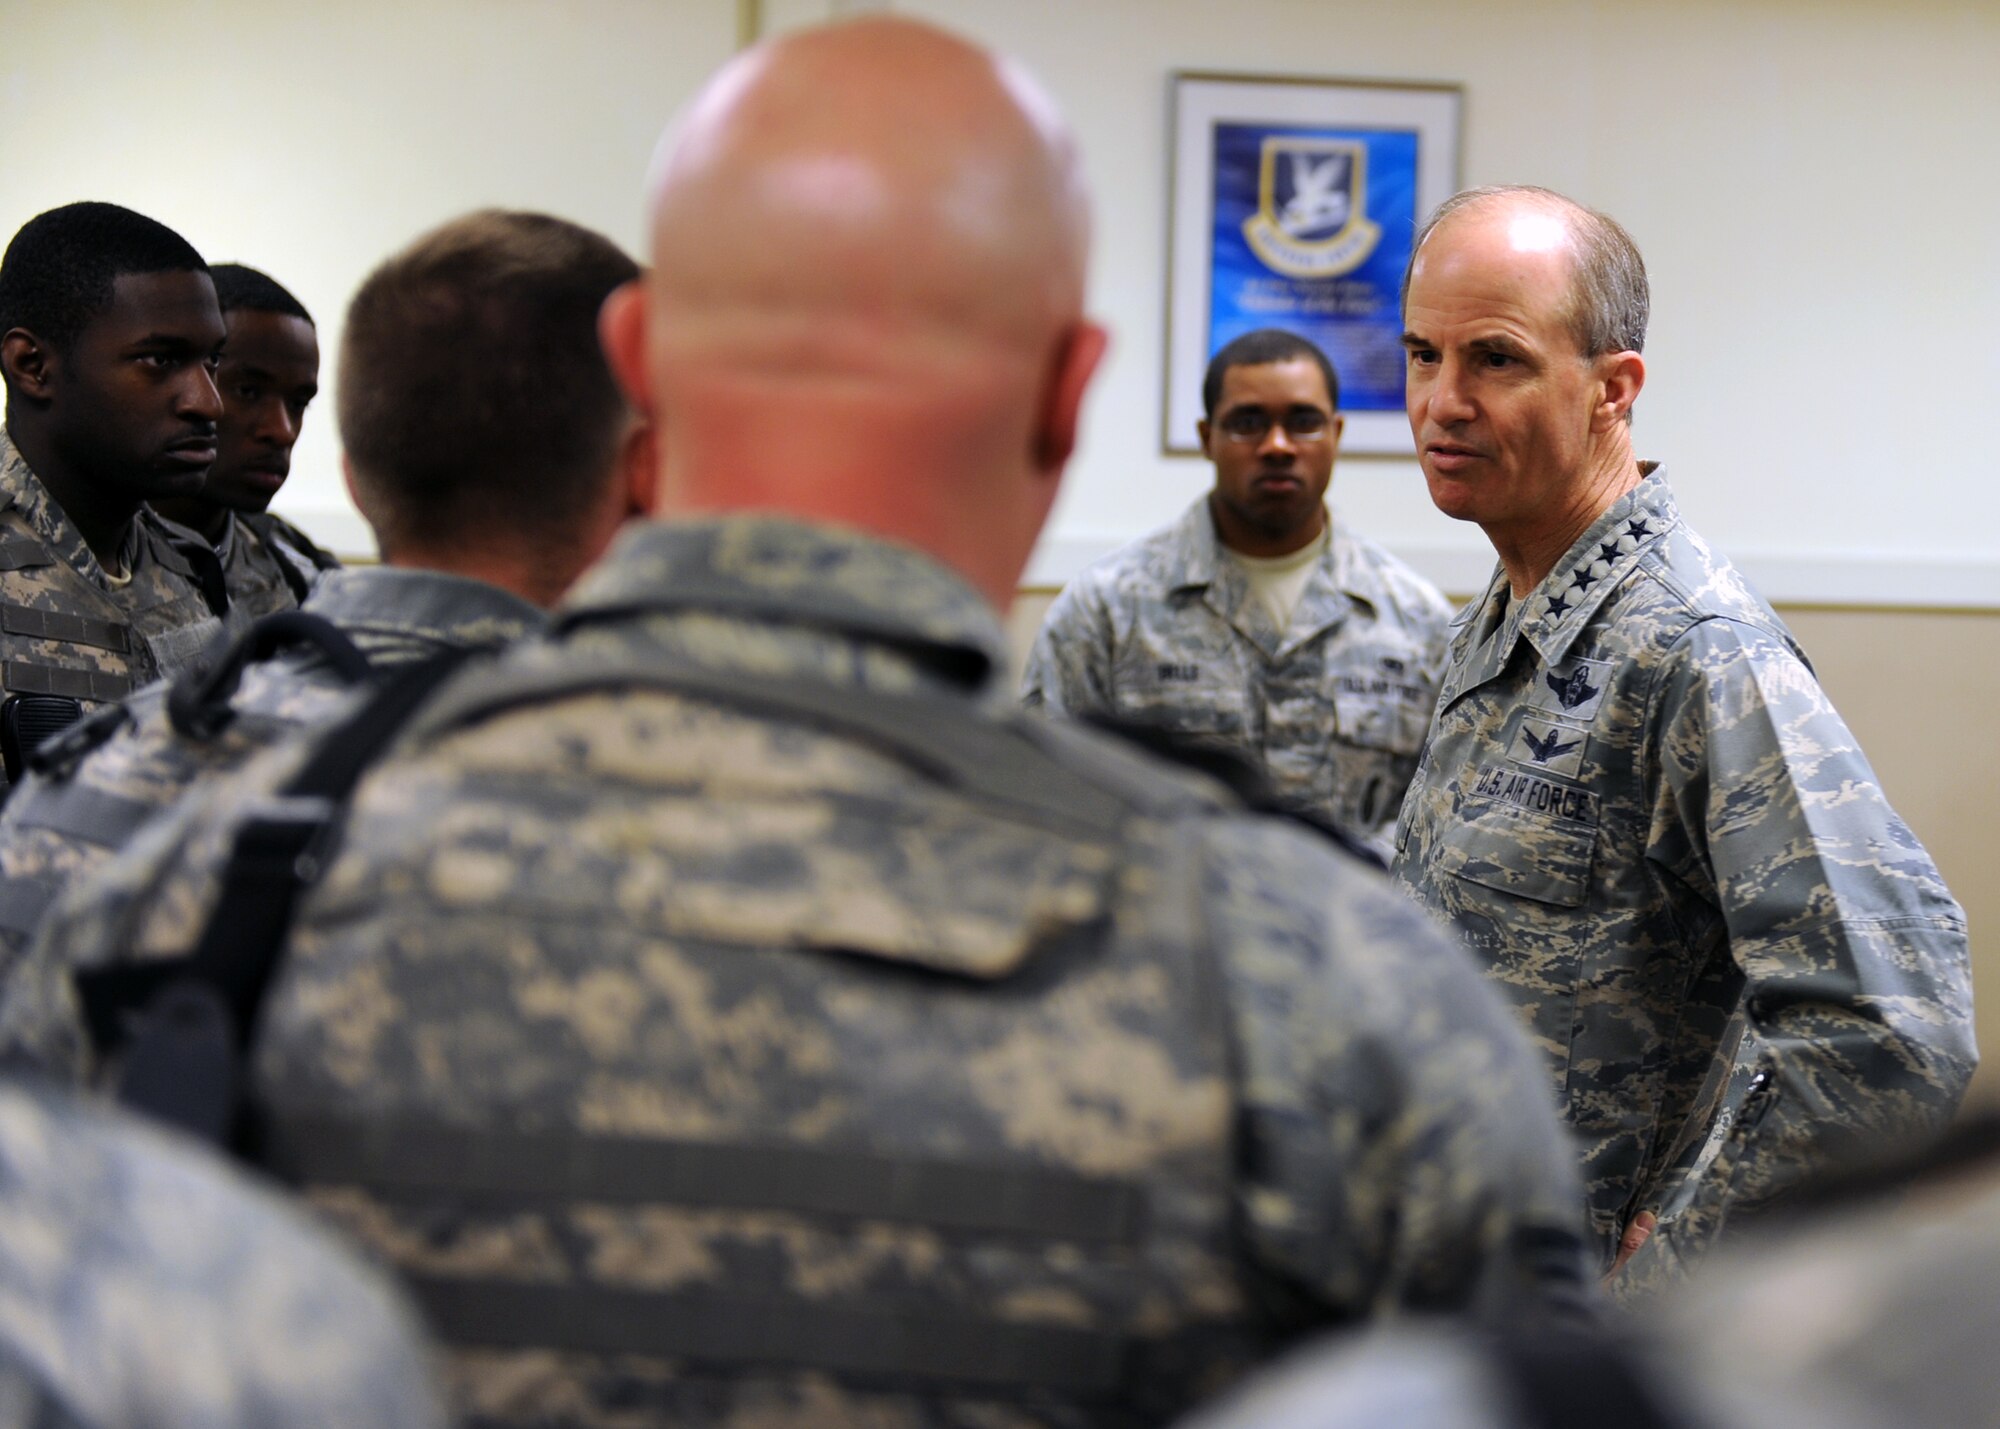 MINOT AIR FORCE BASE, N.D. -- Gen. Kevin P. Chilton, United States Strategic Command commander, visits with members of the 91st Security Forces Group during a guard mount here April 20. General Chilton’s visit was one of encouragement to the men and women of Minot AFB and to personally thank them for the sacrifices made every day in the defense of this nation. (U.S. Air Force photo by Staff Sgt. Keith Ballard)